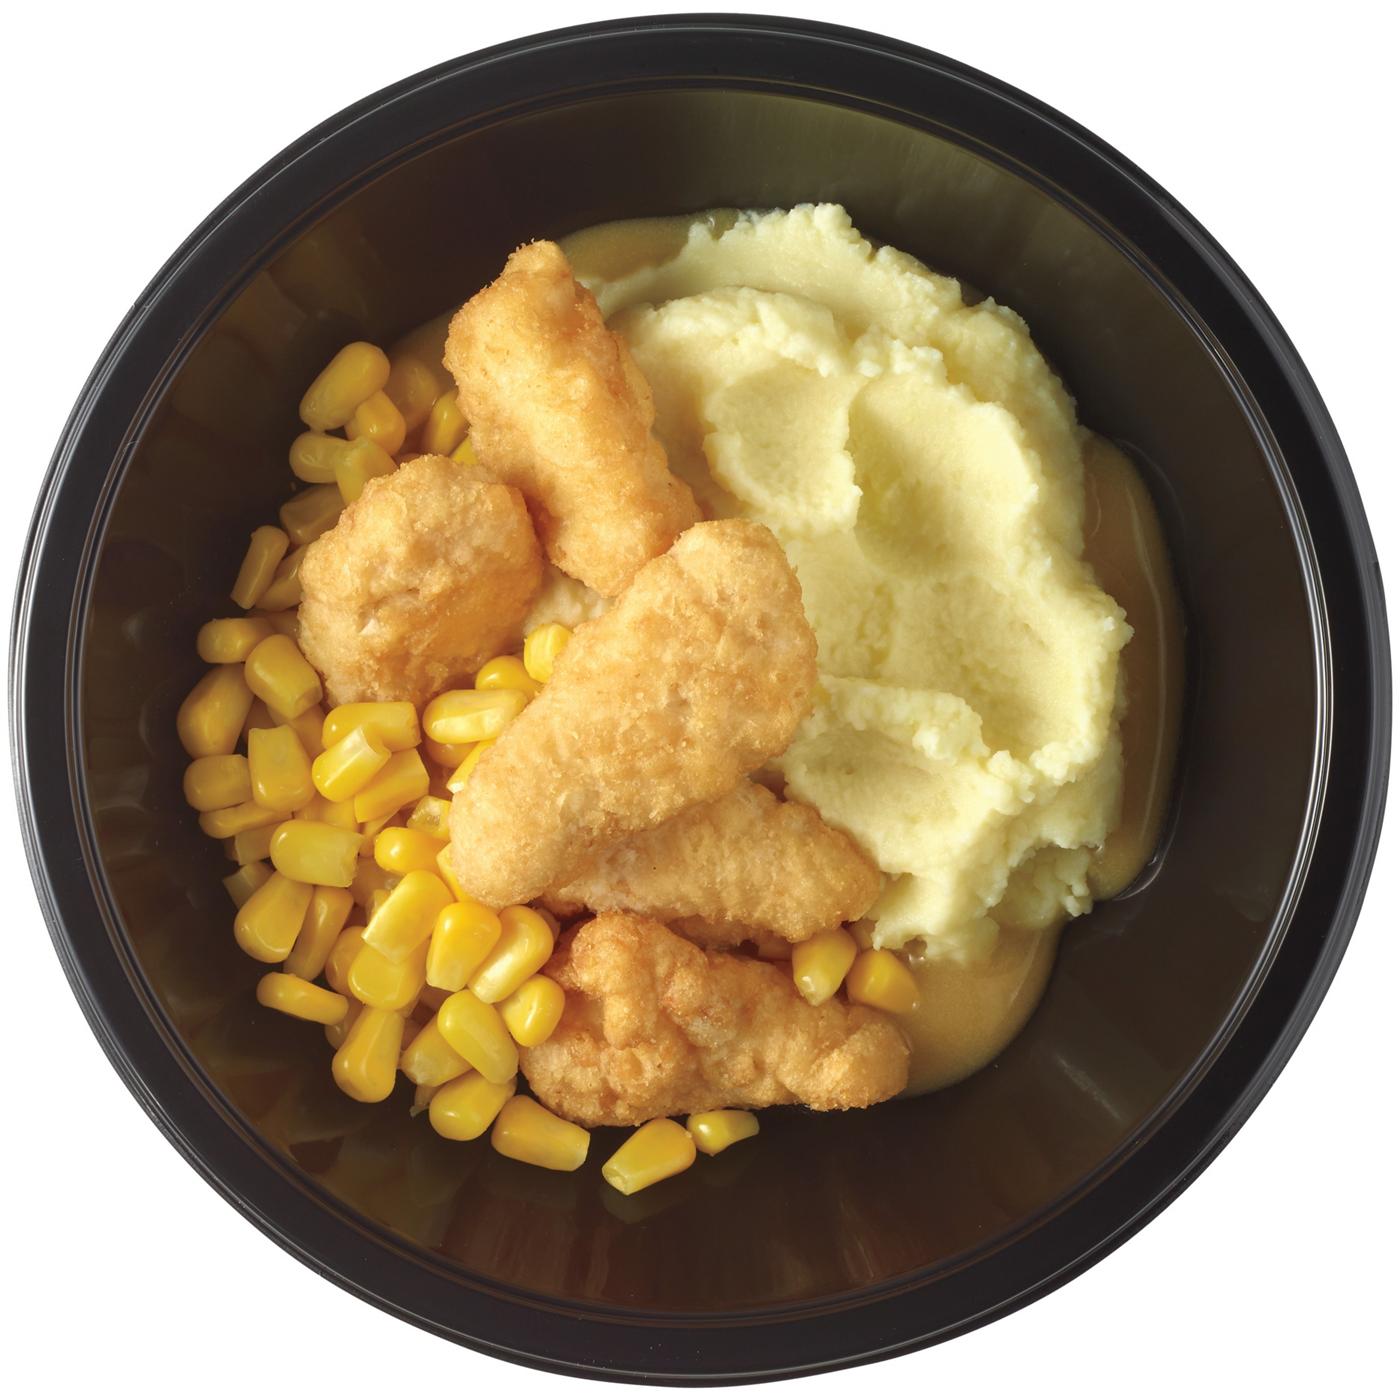 Meal Simple by H-E-B Breaded Chicken, Mashed Potatoes & Corn Bowl; image 5 of 5